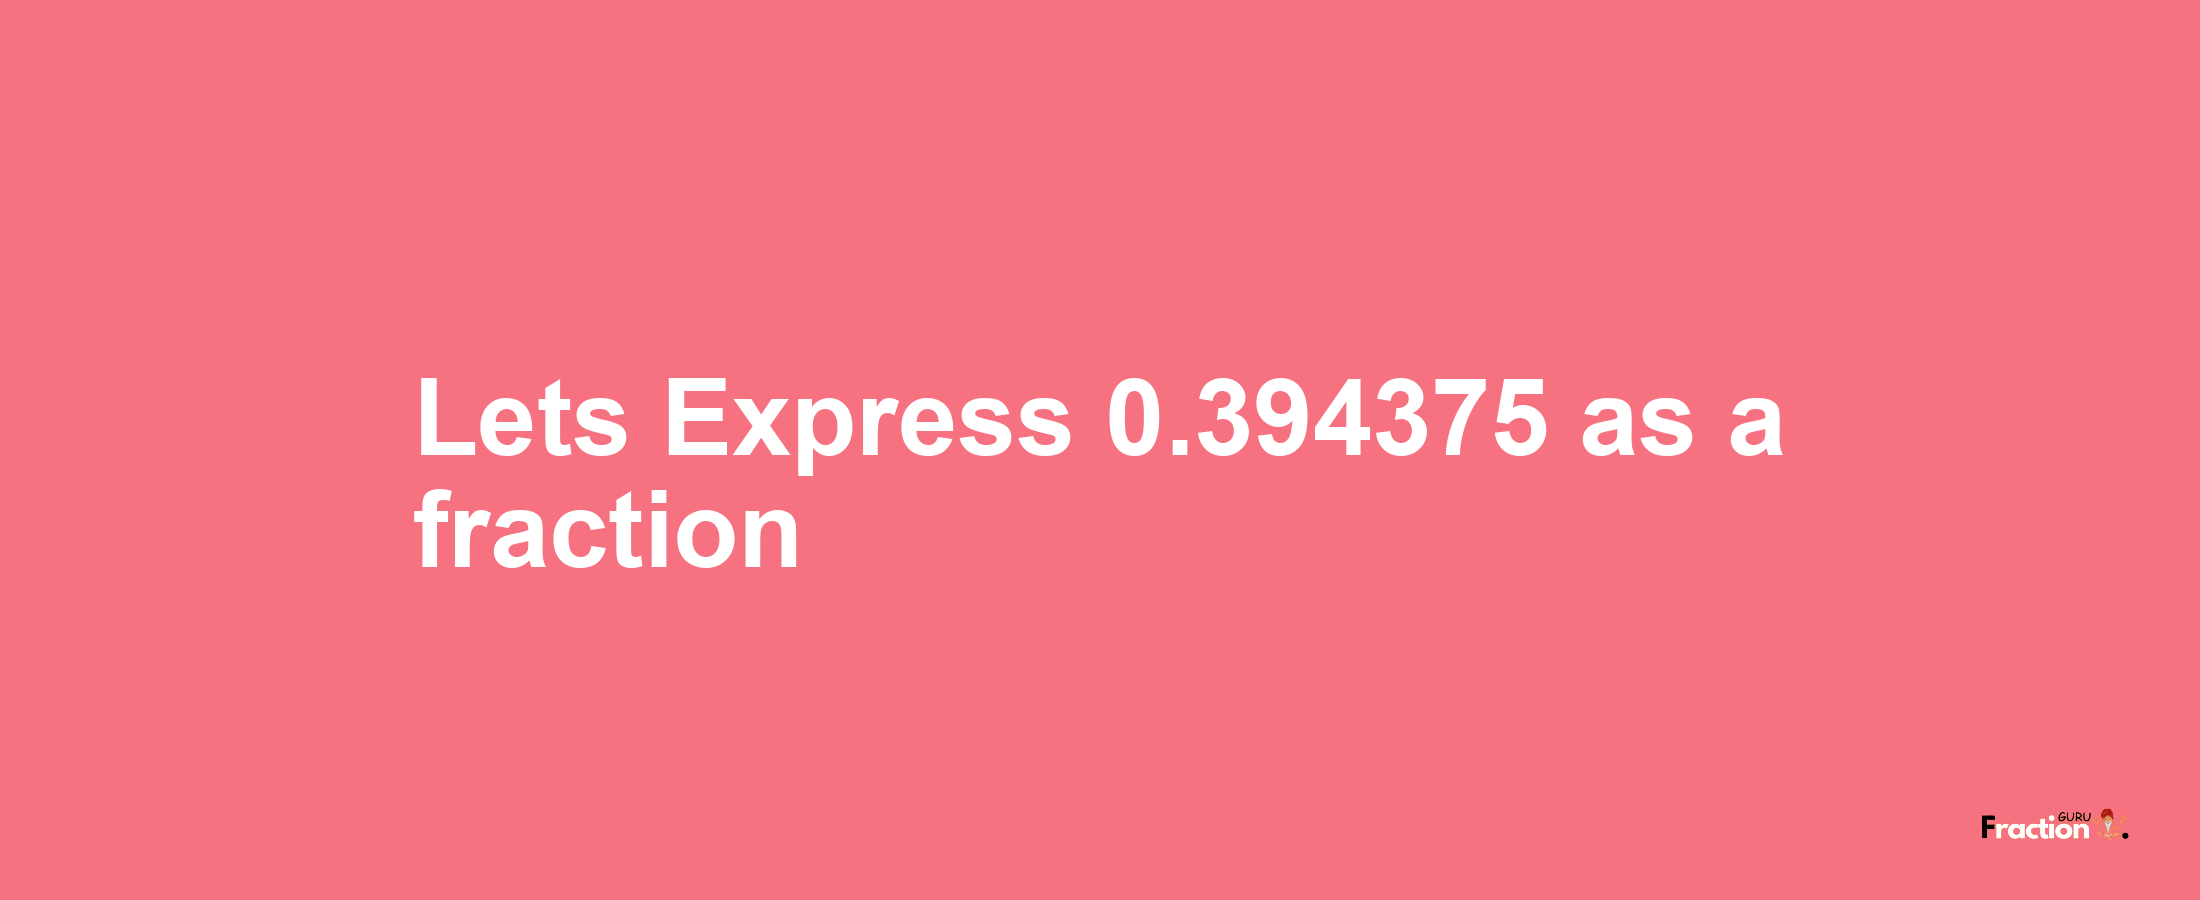 Lets Express 0.394375 as afraction